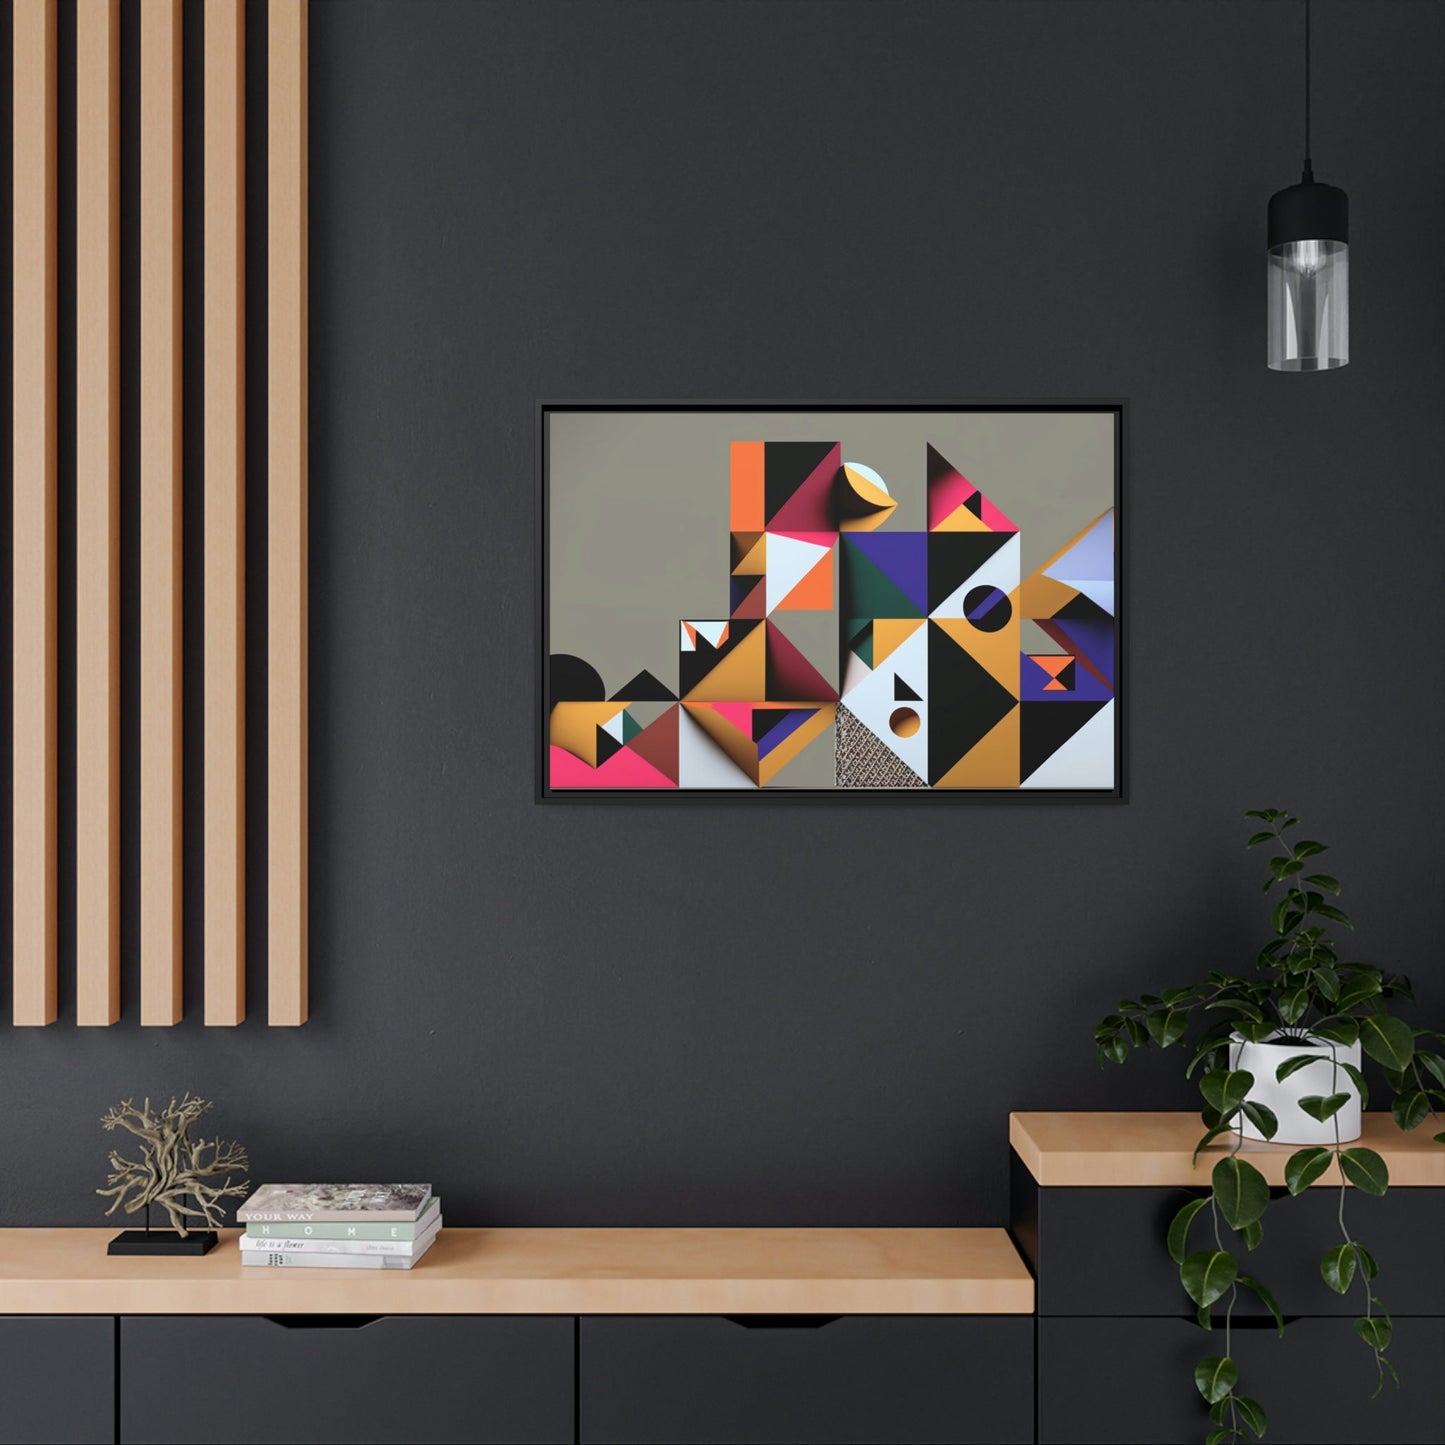 Framed Poster & Canvas of Abstract Symmetry: A Kaleidoscope of Colors